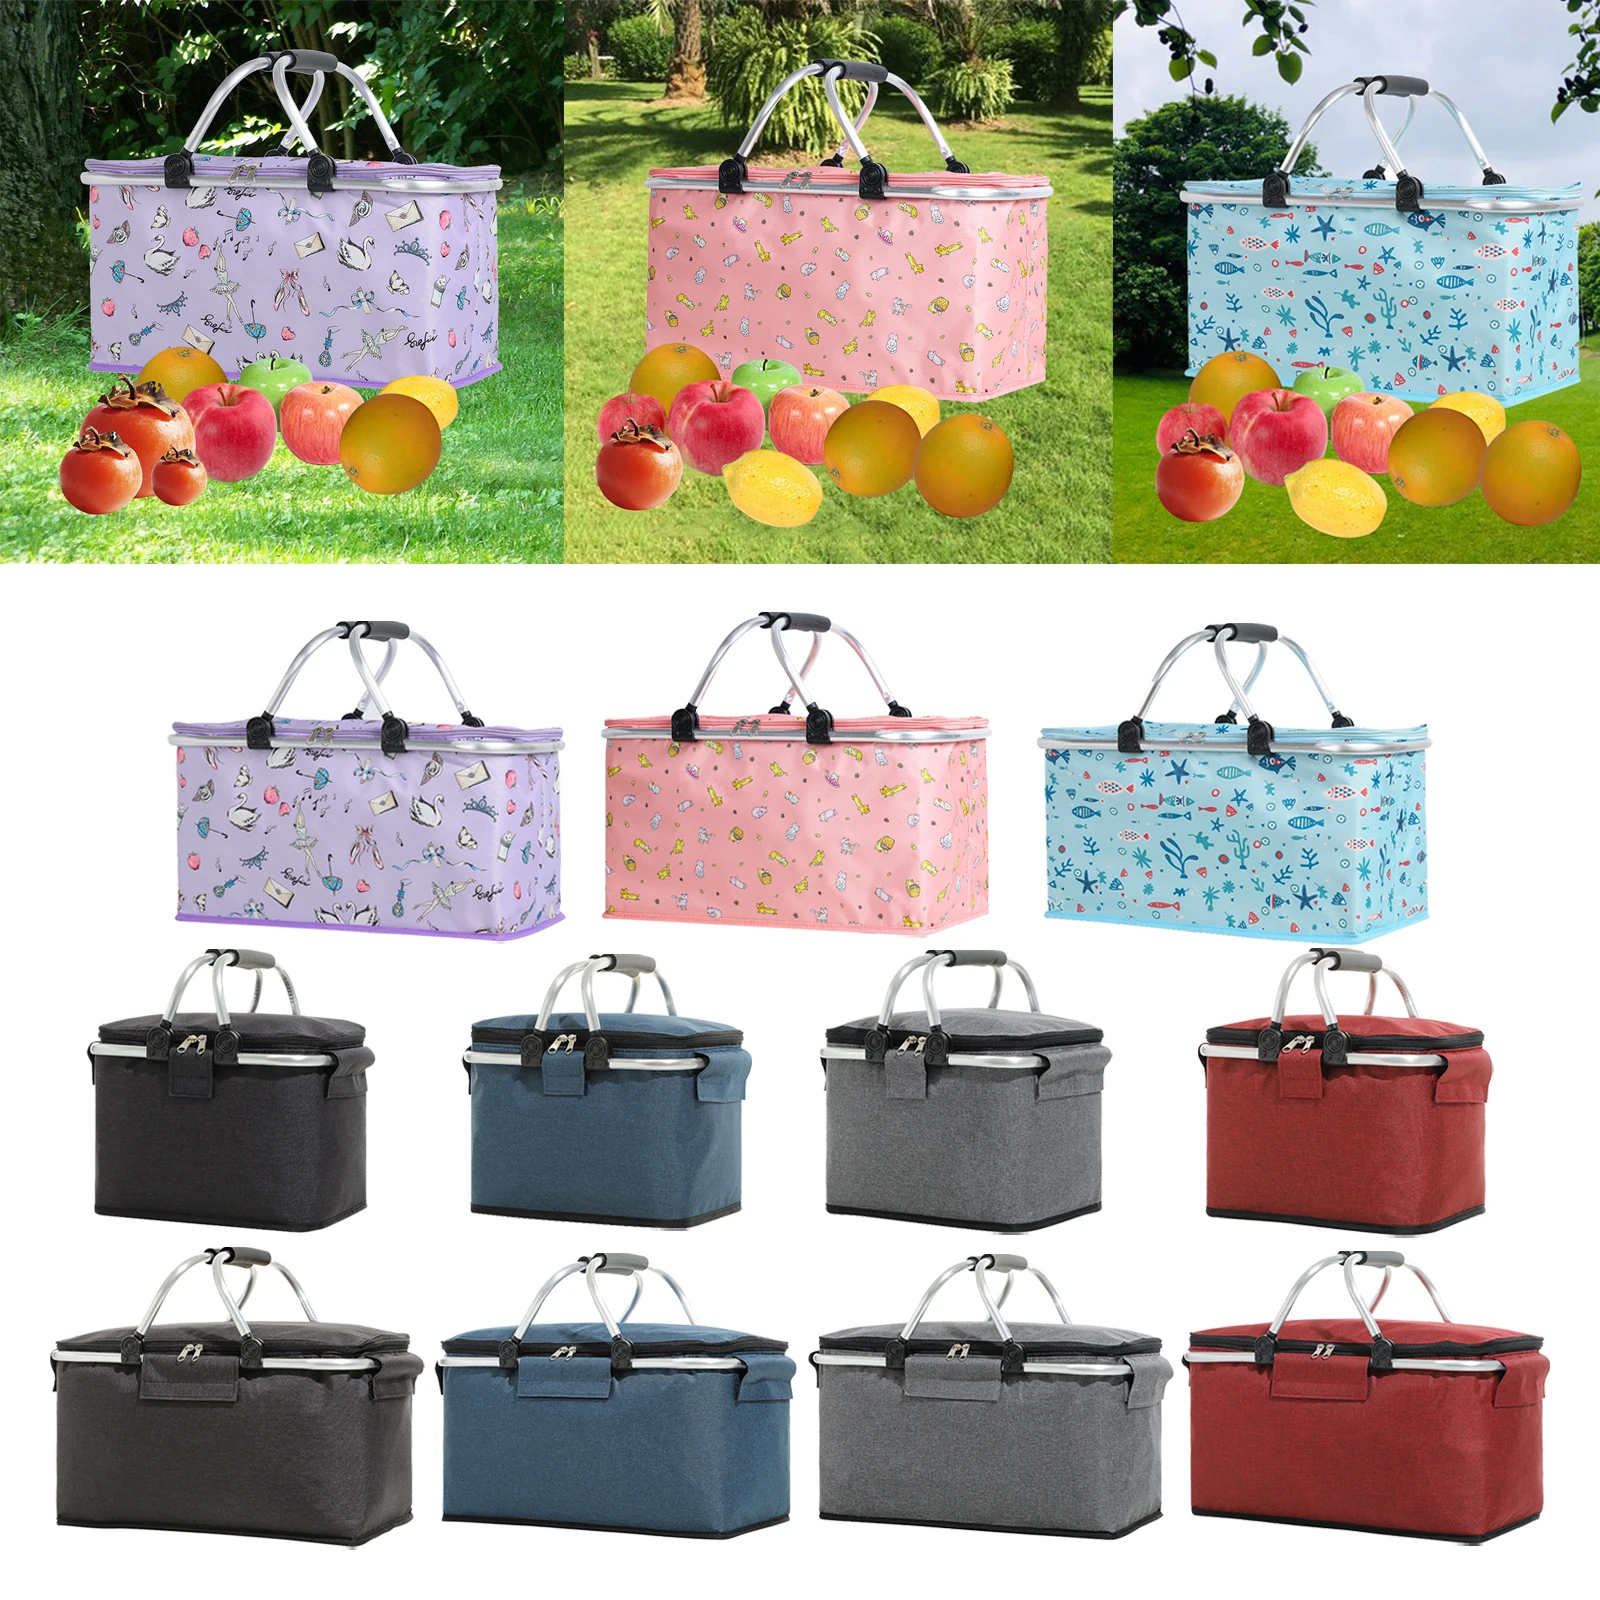 Insulated Cooler Picnic Basket for Adult Men Women Folding Container Store